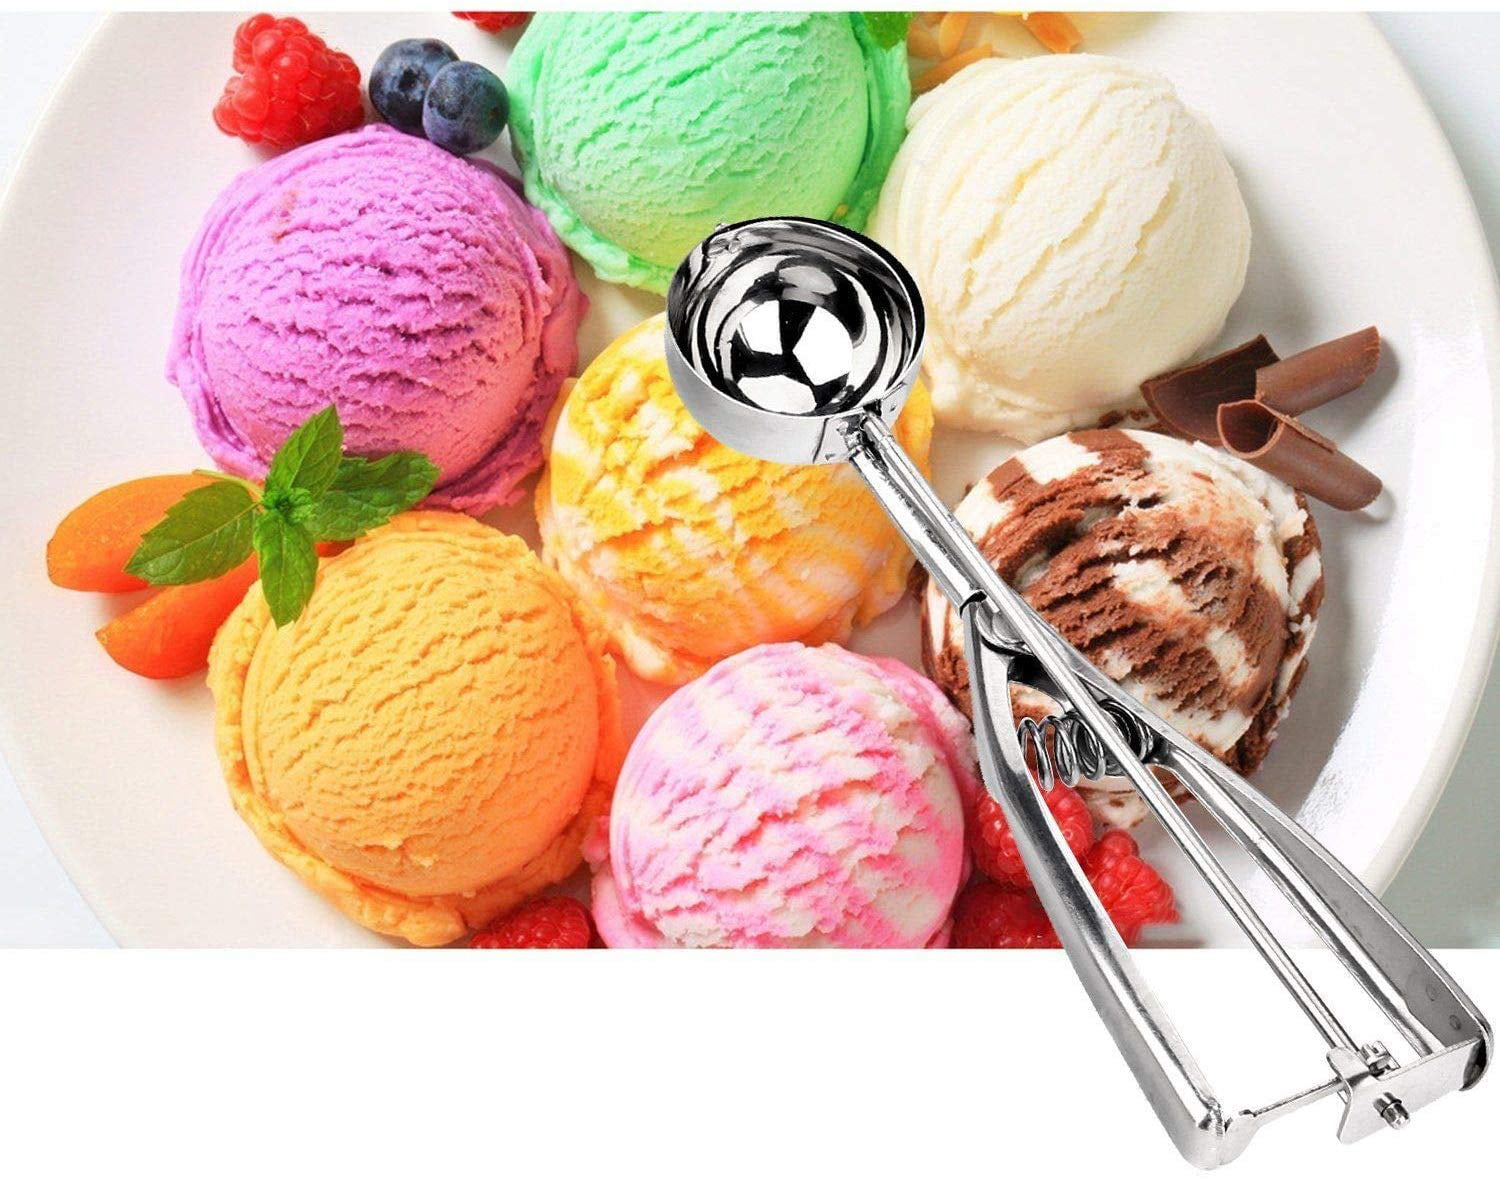 Water Melon Ice Cream Girlslove talk 2 Pack 7.3-1.8/7.5-2.2（L×W） Inches Ice Cream Scoop Stainless Steel ice Cream Scoop with Easy Trigger for Fruits 